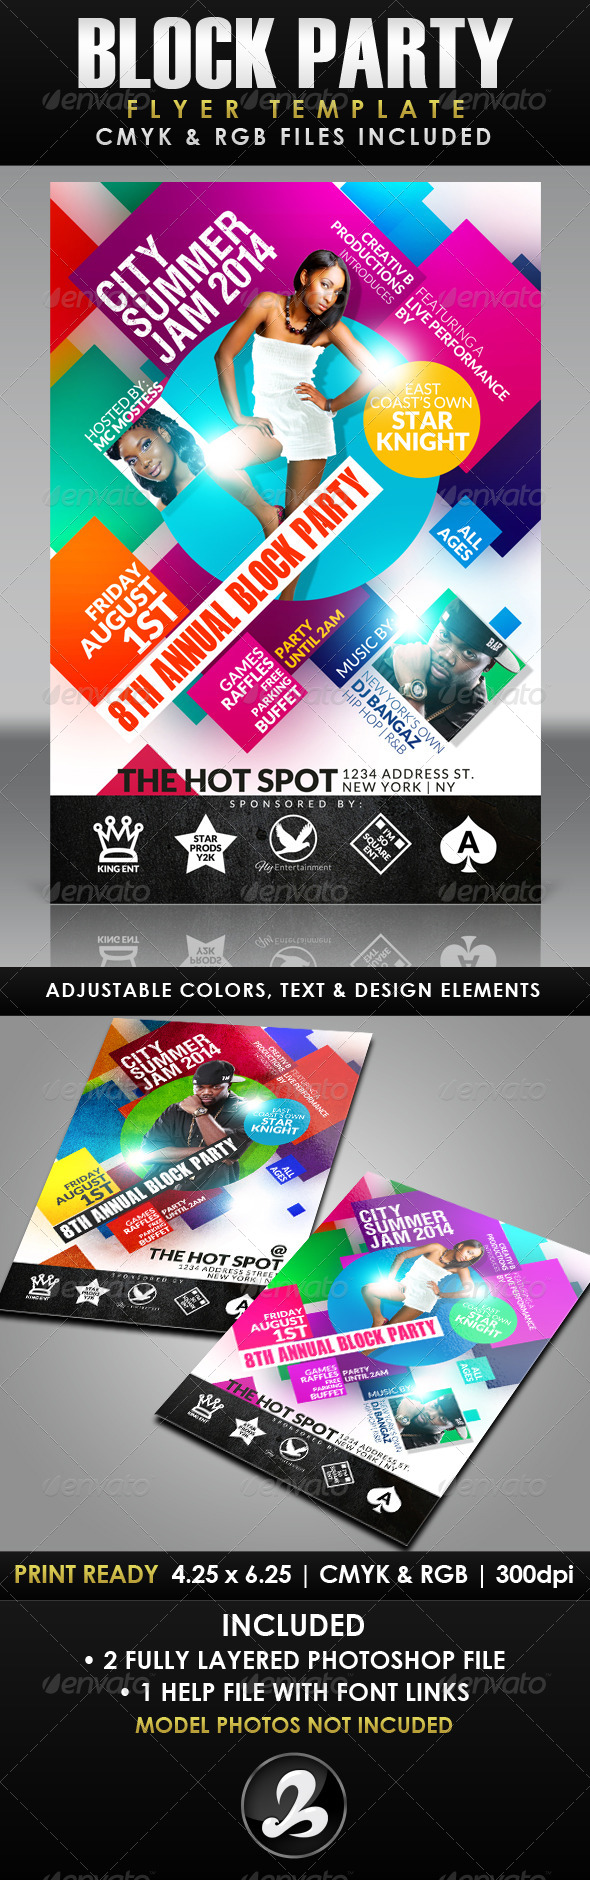 Block Party Flyer Template Throughout Block Party Template Flyers Free